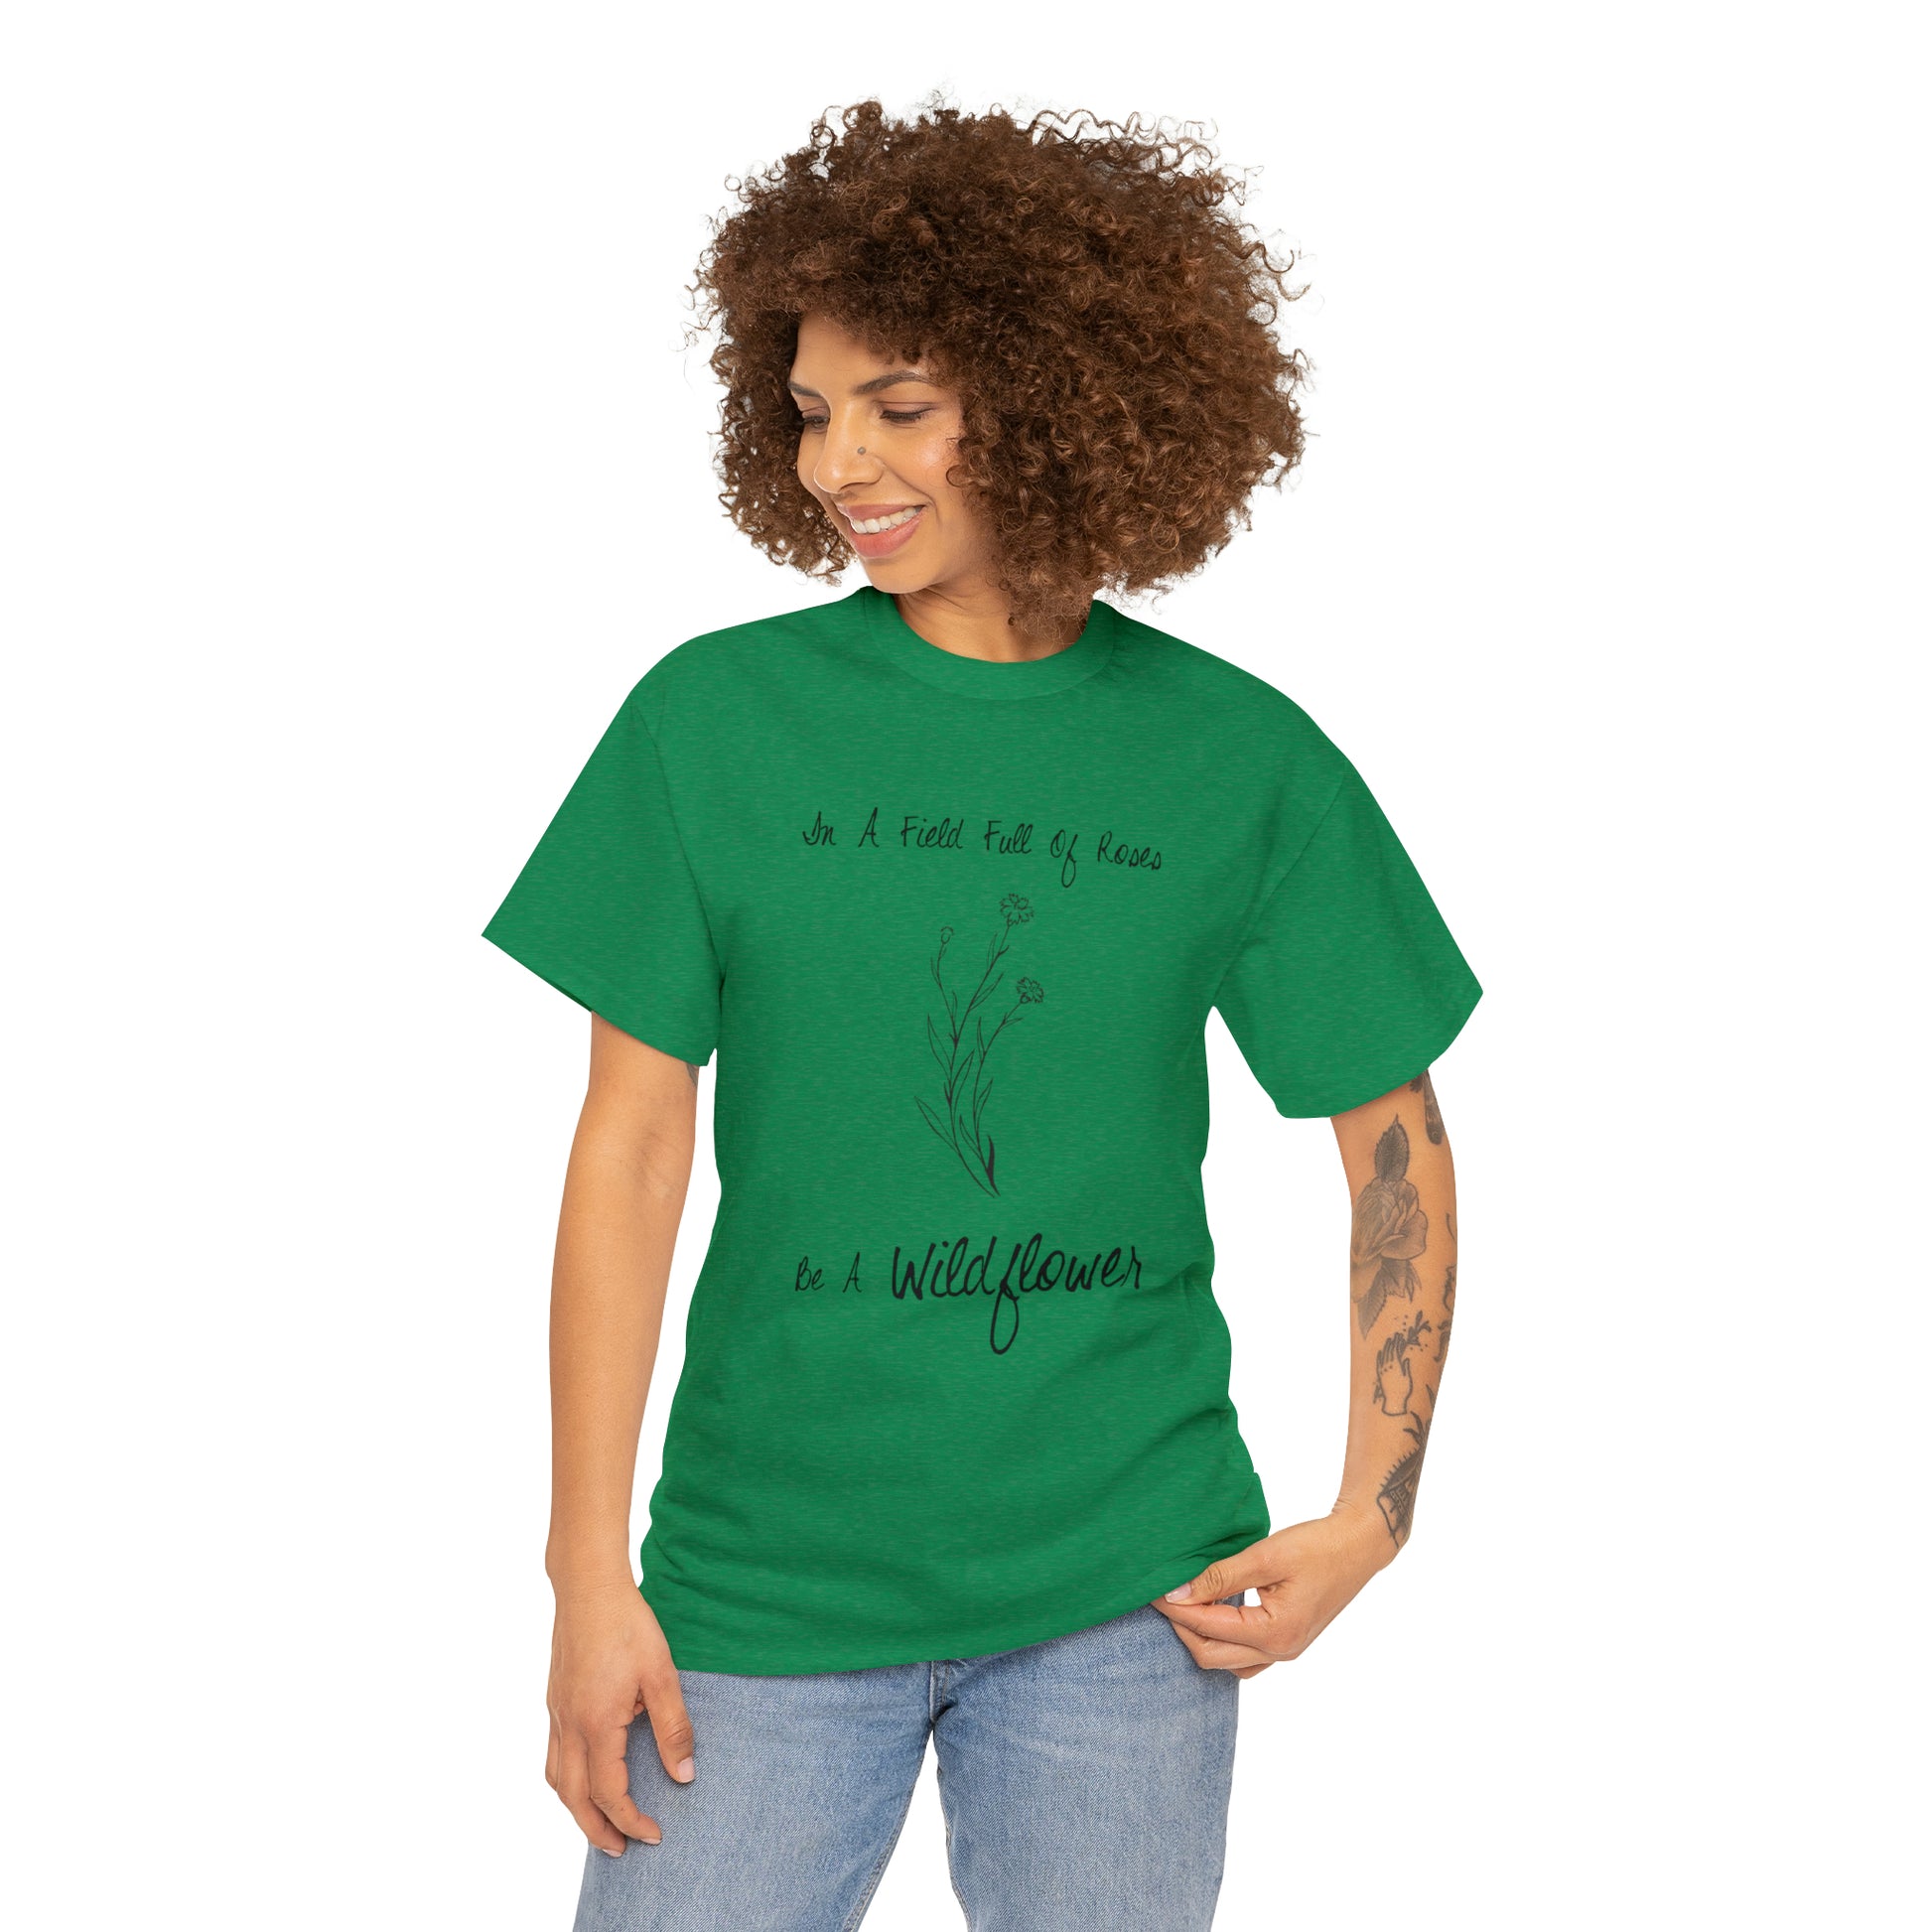 "Be A Wildflower" T-Shirt - Weave Got Gifts - Unique Gifts You Won’t Find Anywhere Else!